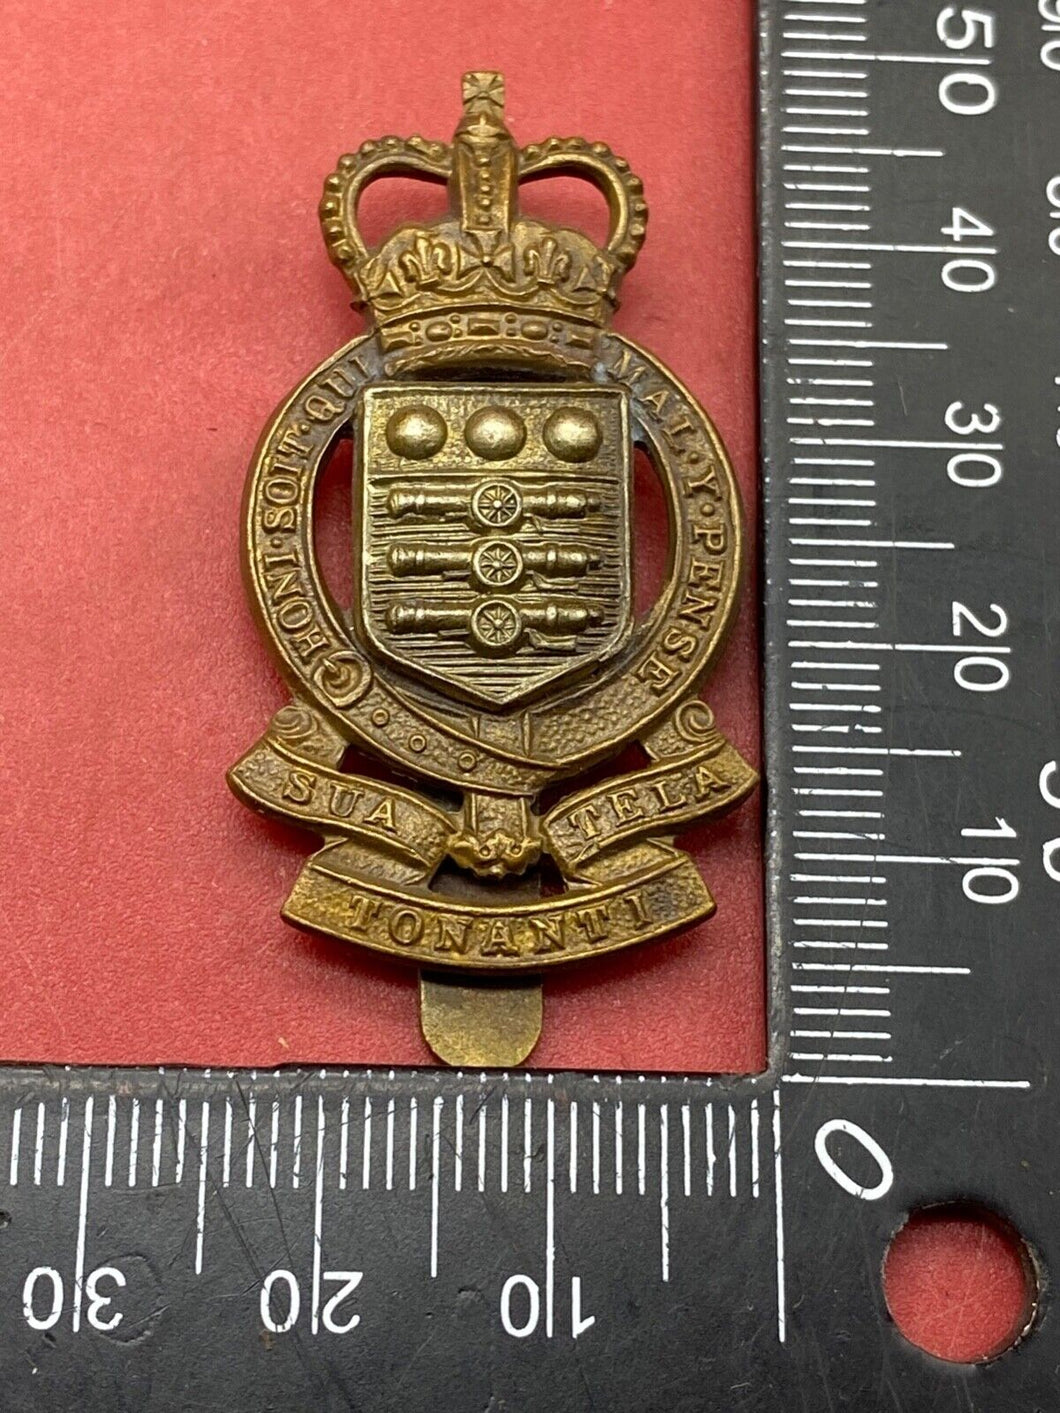 British Army - Army Ordnance Corps Queen's Crown Cap Badge. Maker Marked Slider.